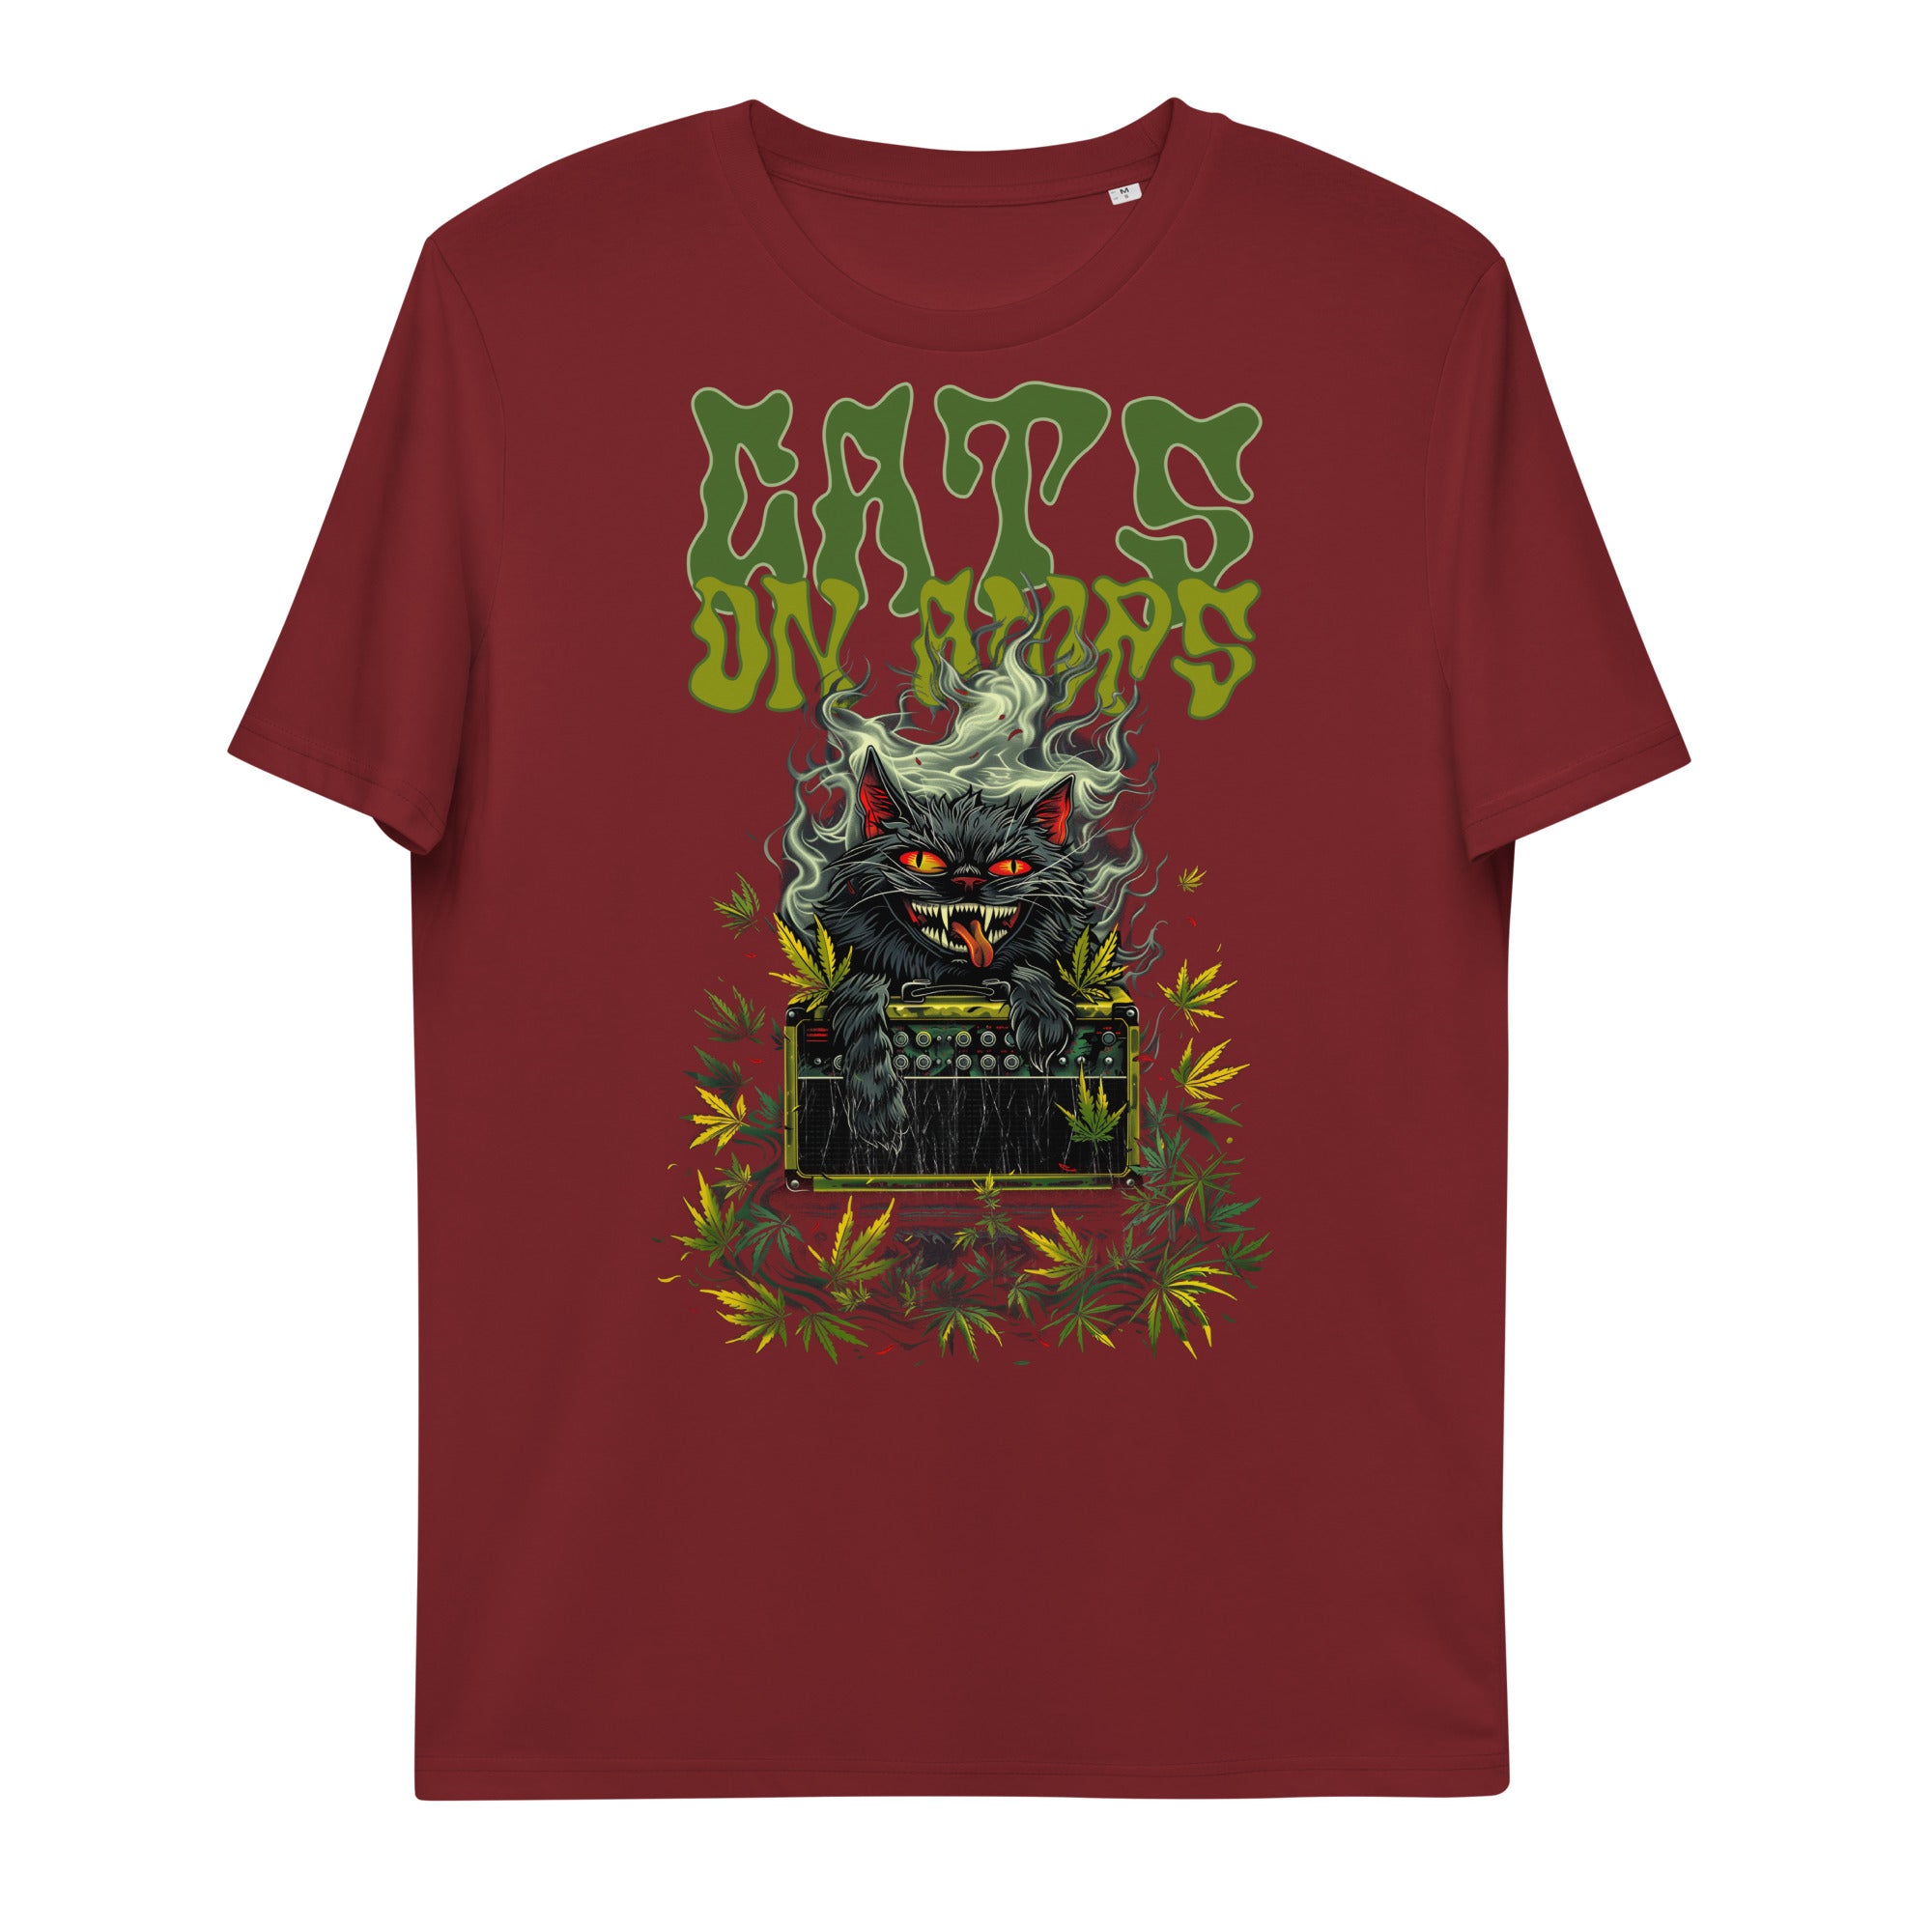 CATS ON AMPS - 420 Red Eye - Unisex organic cotton t-shirt